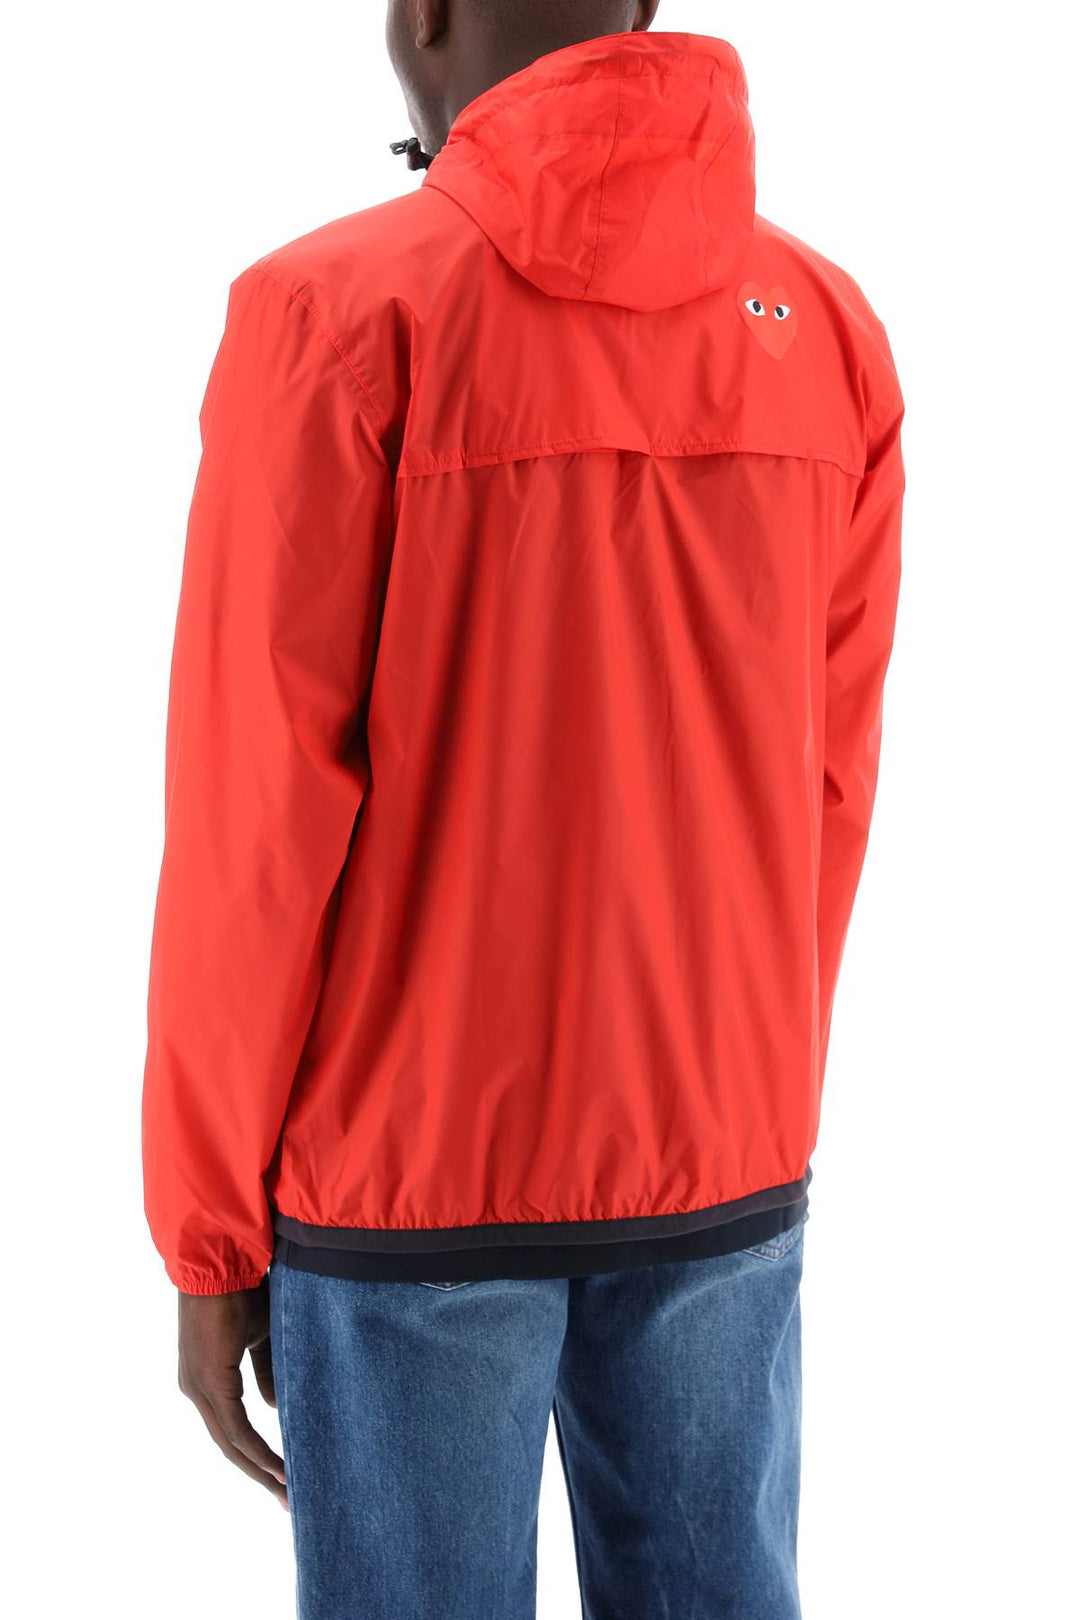 Comme Des Garcons Play Comme Des Garçons Play X K Way Ripstop Jacket   Red